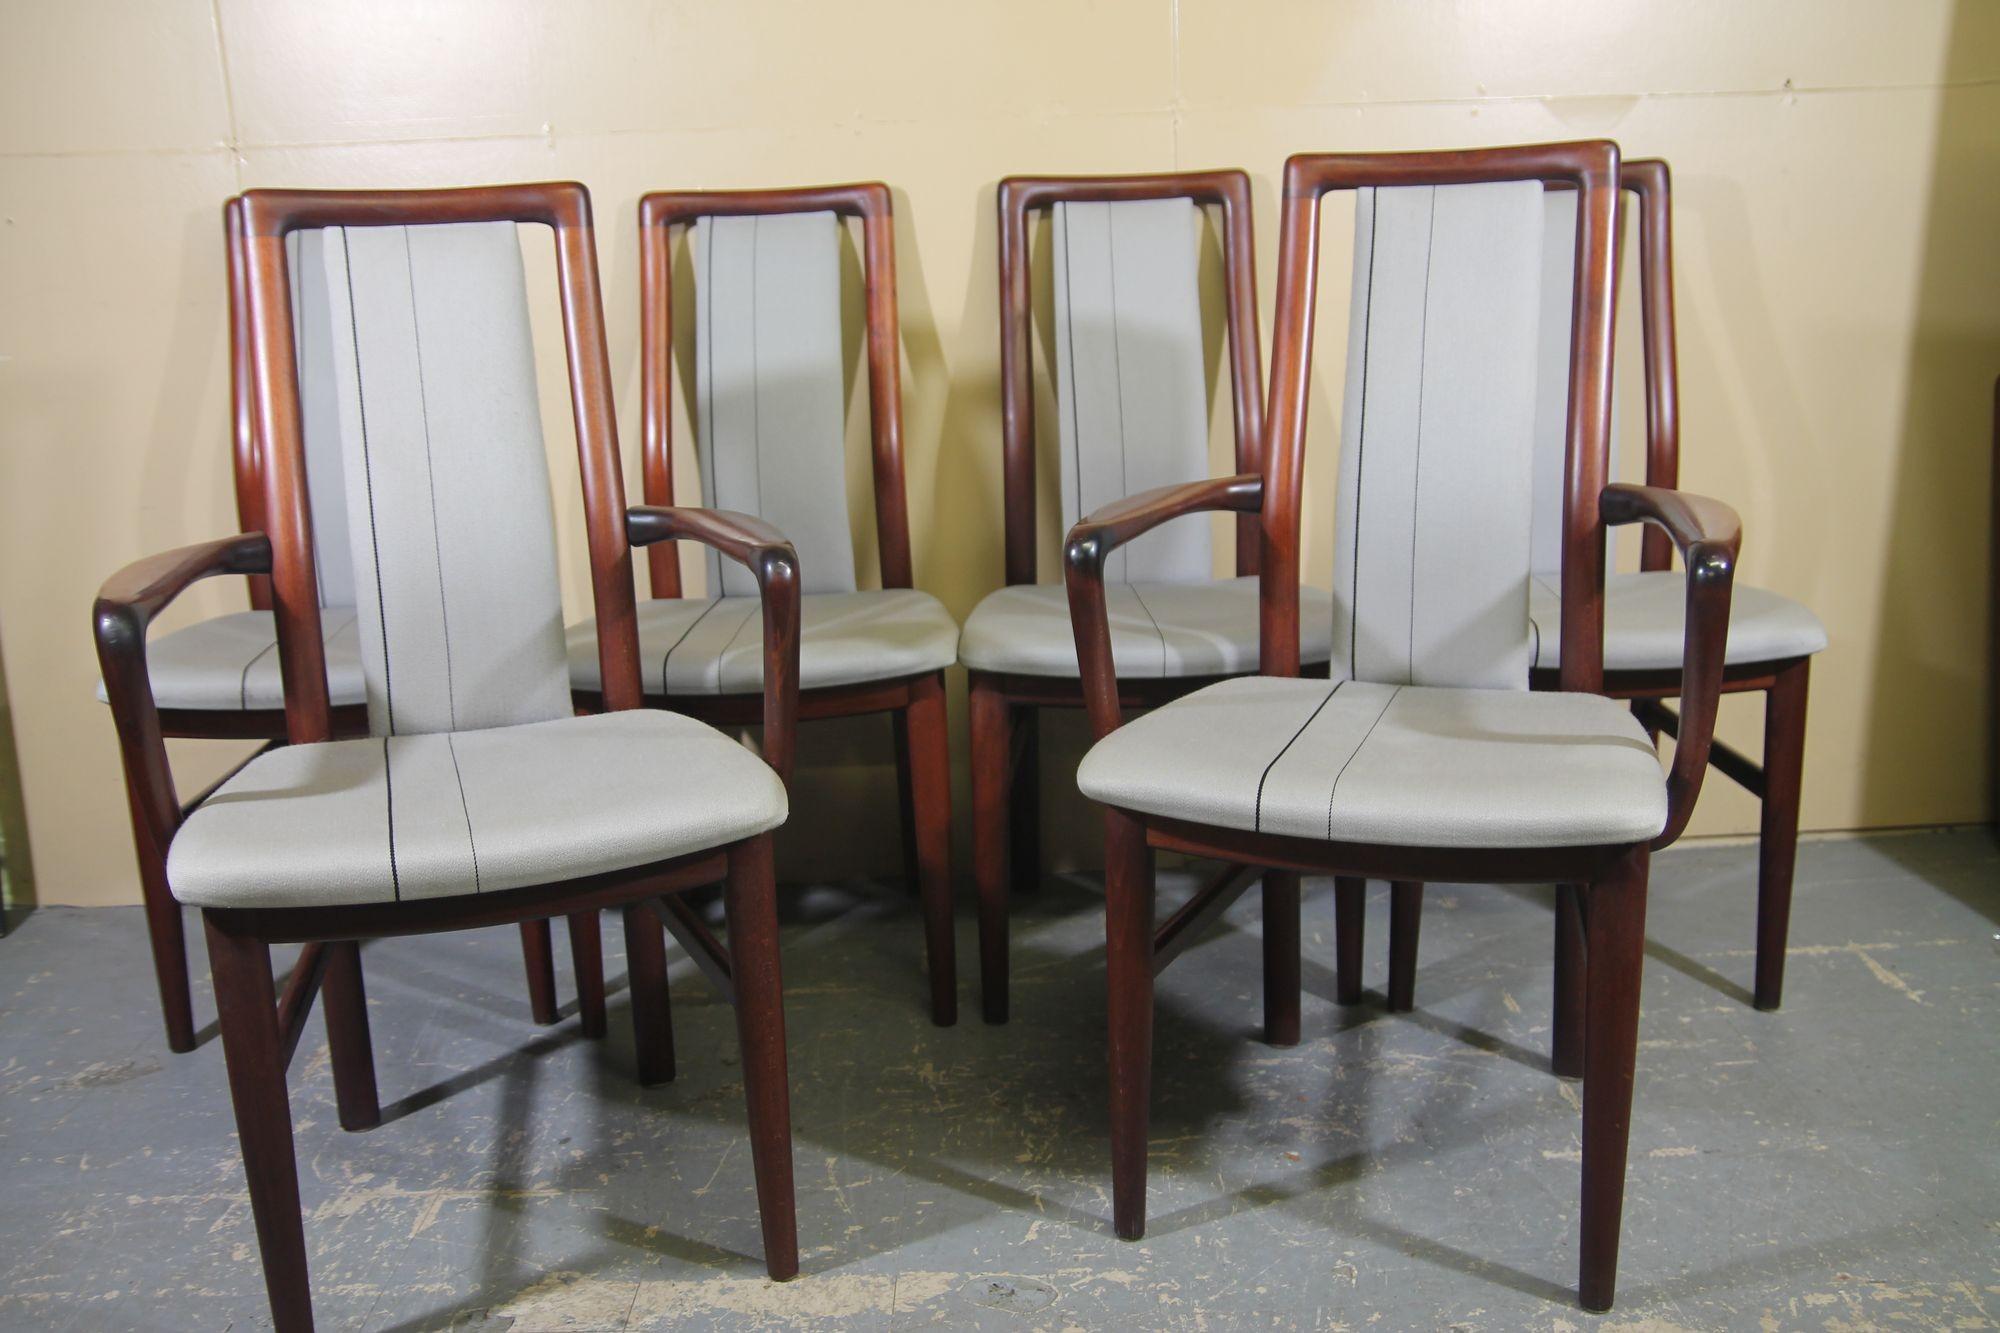 Pleased to offer this great set of 6 rosewood dining chairs by SVA Mobler. This set consist of 2 arm chairs and 4 armless chairs. Arm chairs are 22 x 18 x 37.5, side chairs are 18.5 x 18 x 37.5. This set is in great vintage shape. The fabric is in